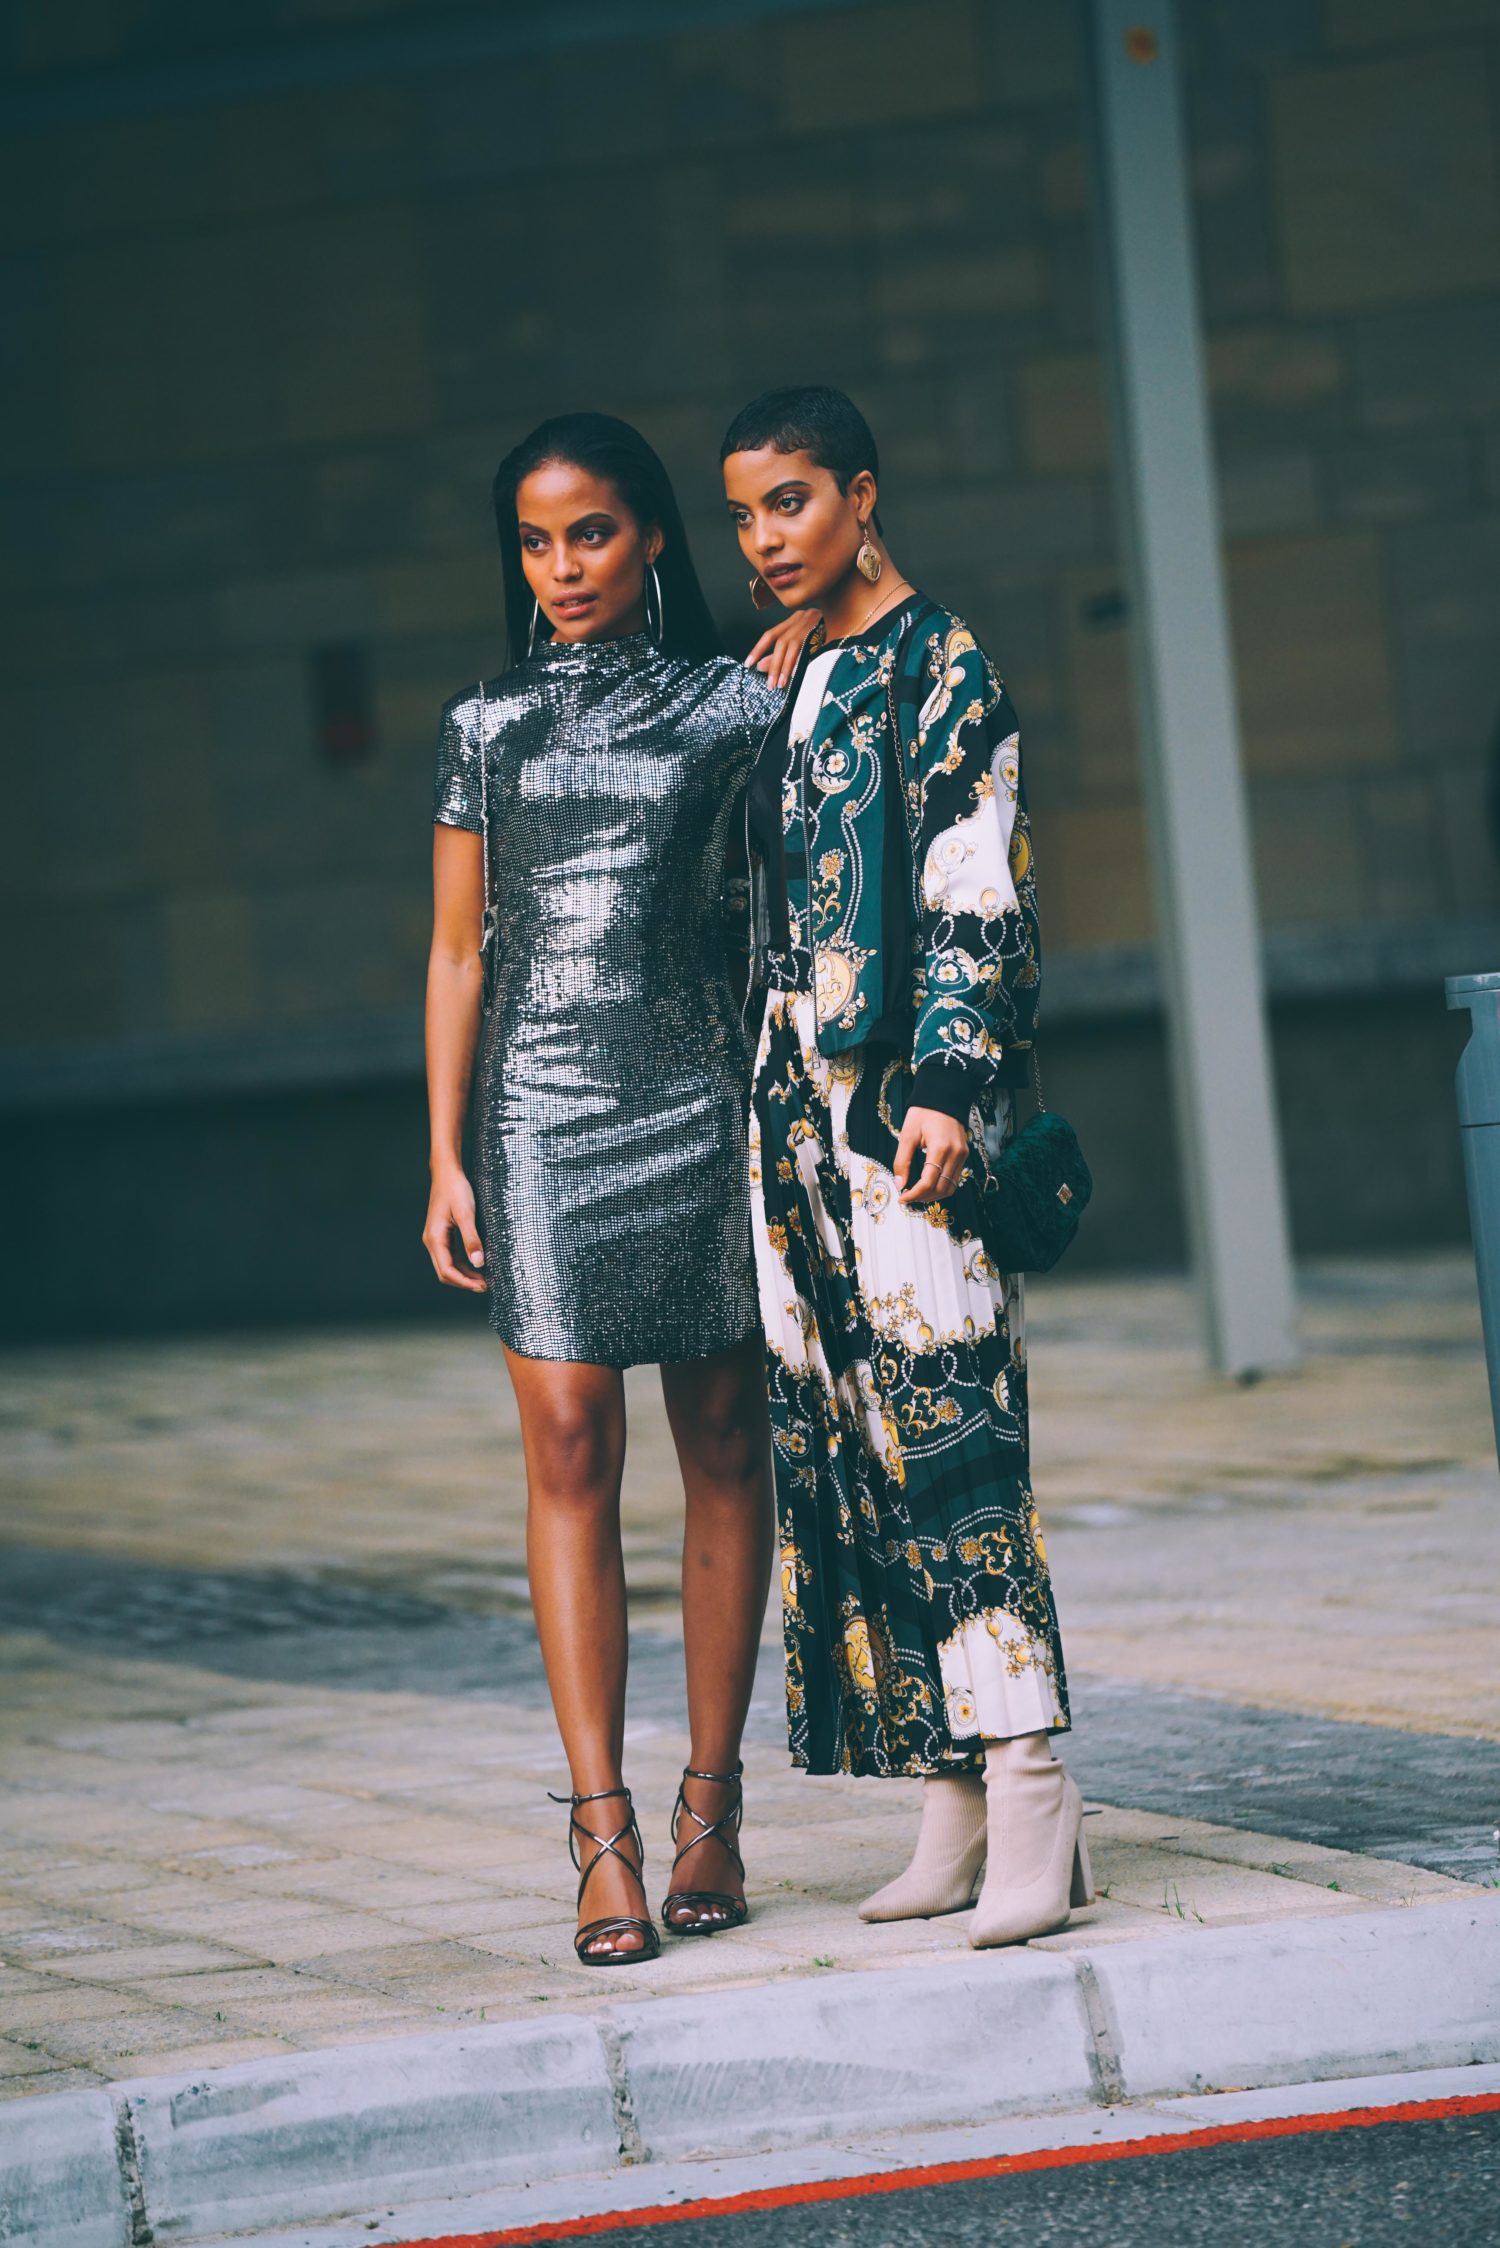 It’s Official: These Were the Most Killer Street Style & Front Row Looks From #AFICTFW19